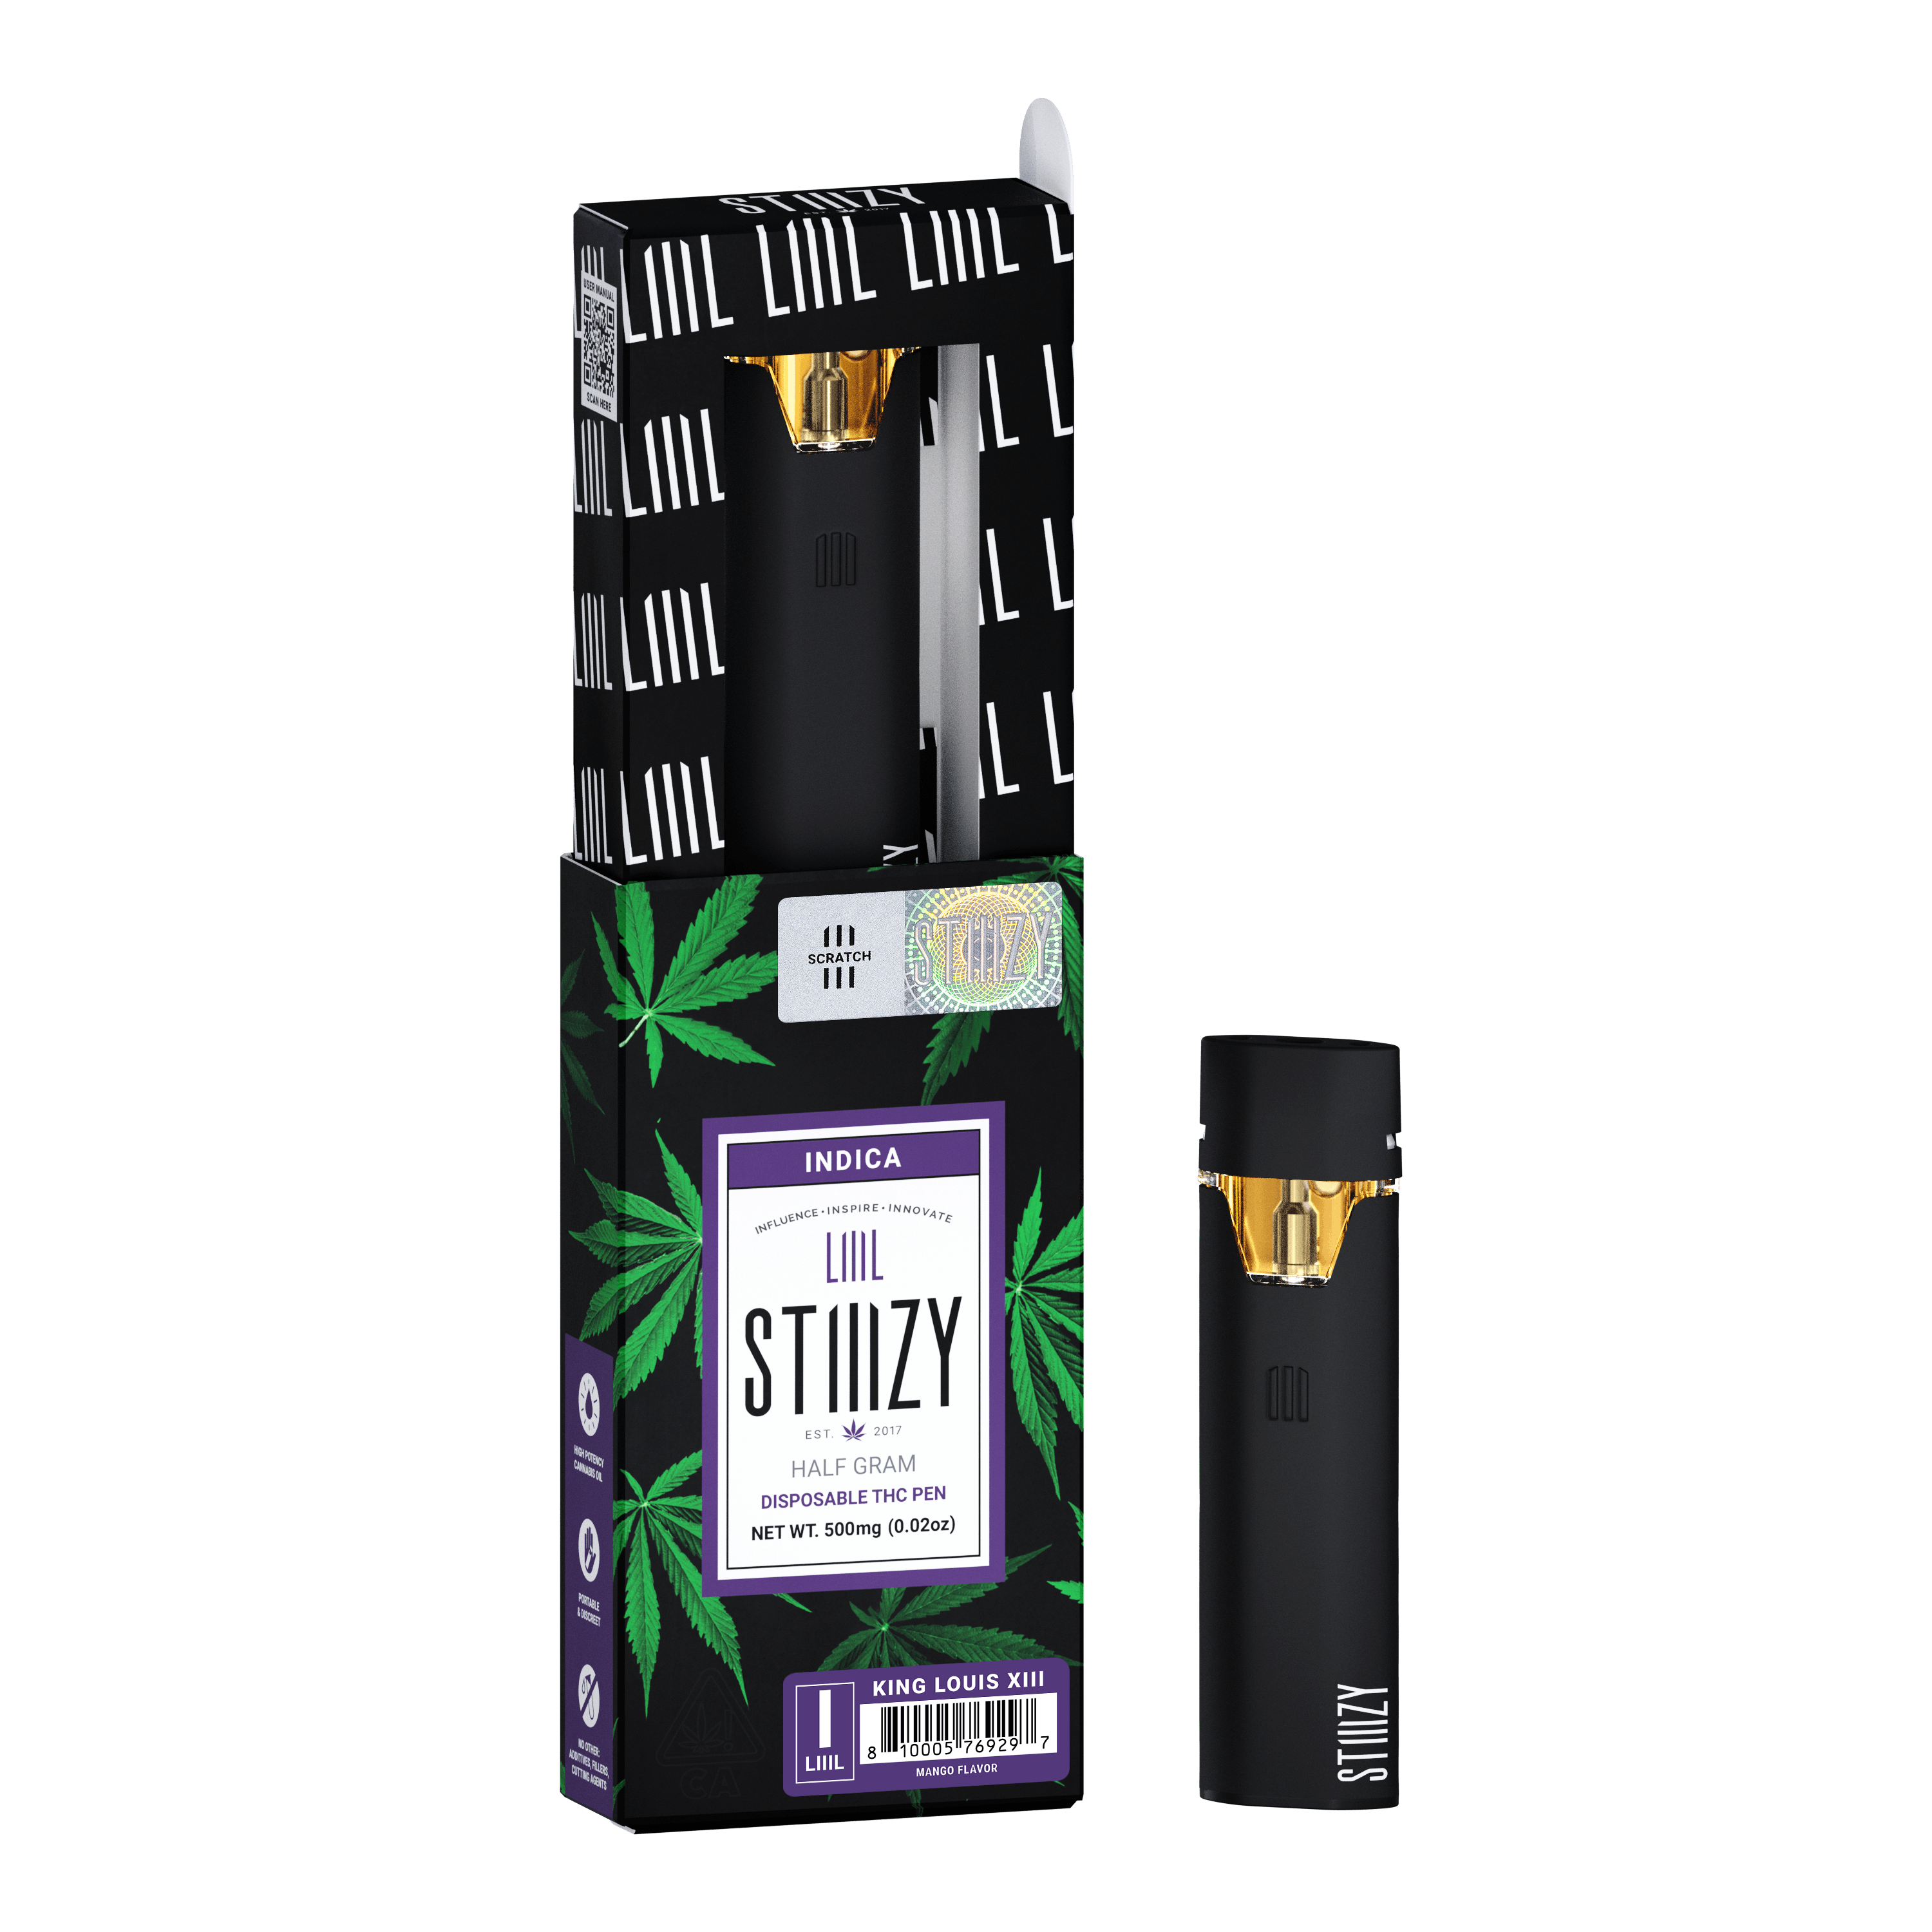 A disposable weed pen with distillate from the King Louis XIII strain stands next to its black box.